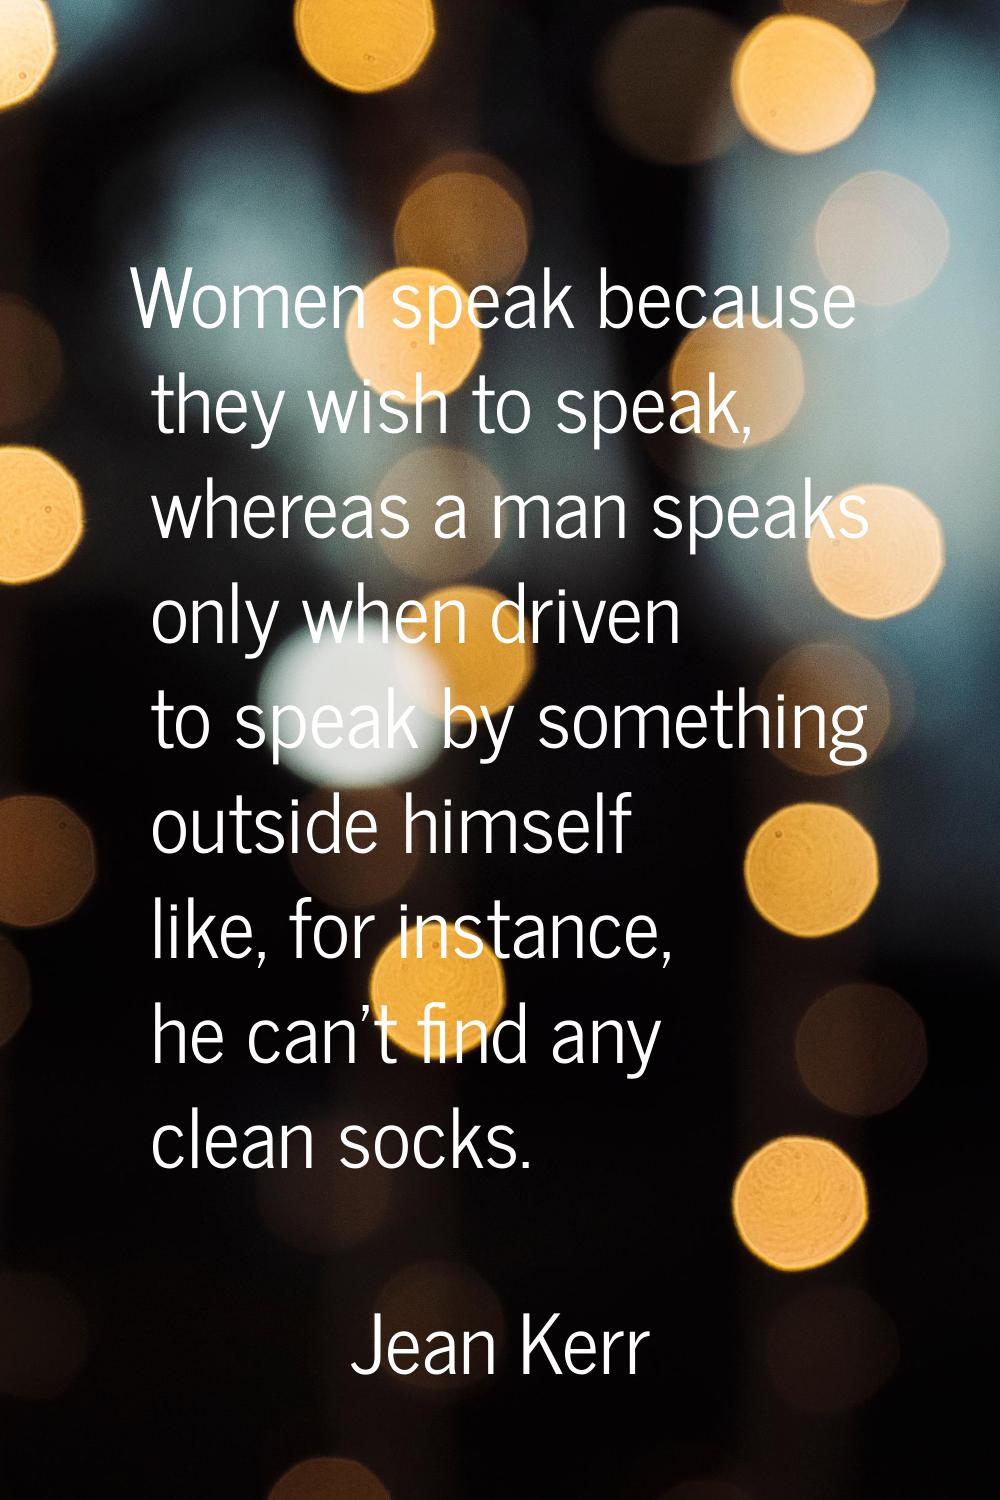 Women speak because they wish to speak, whereas a man speaks only when driven to speak by something